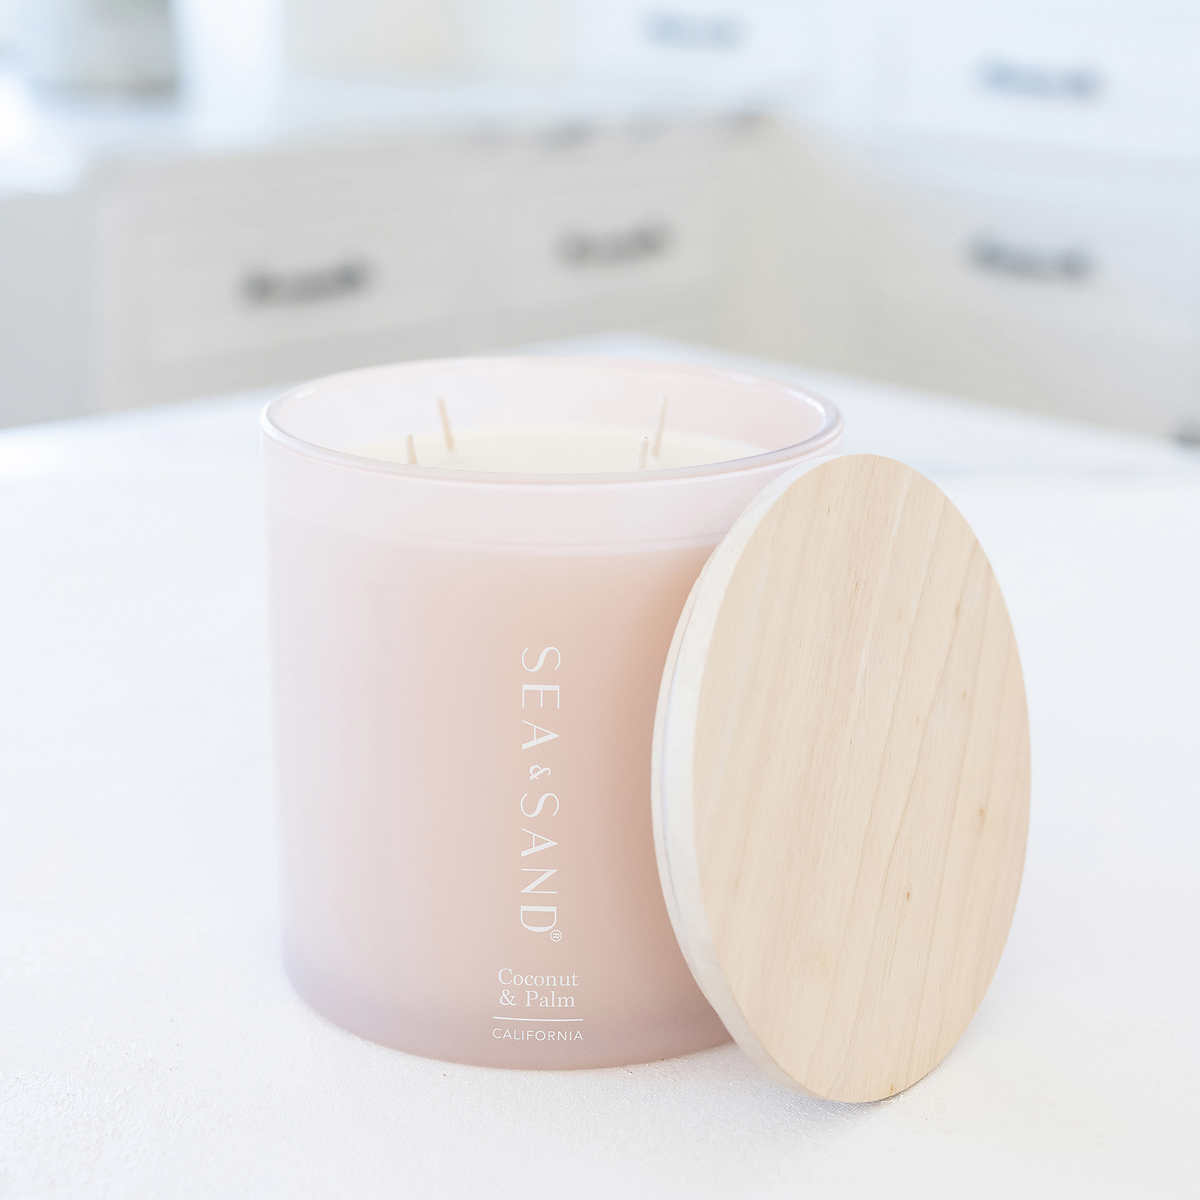 Warm Sand Candle - Wicks N' More Candle Company